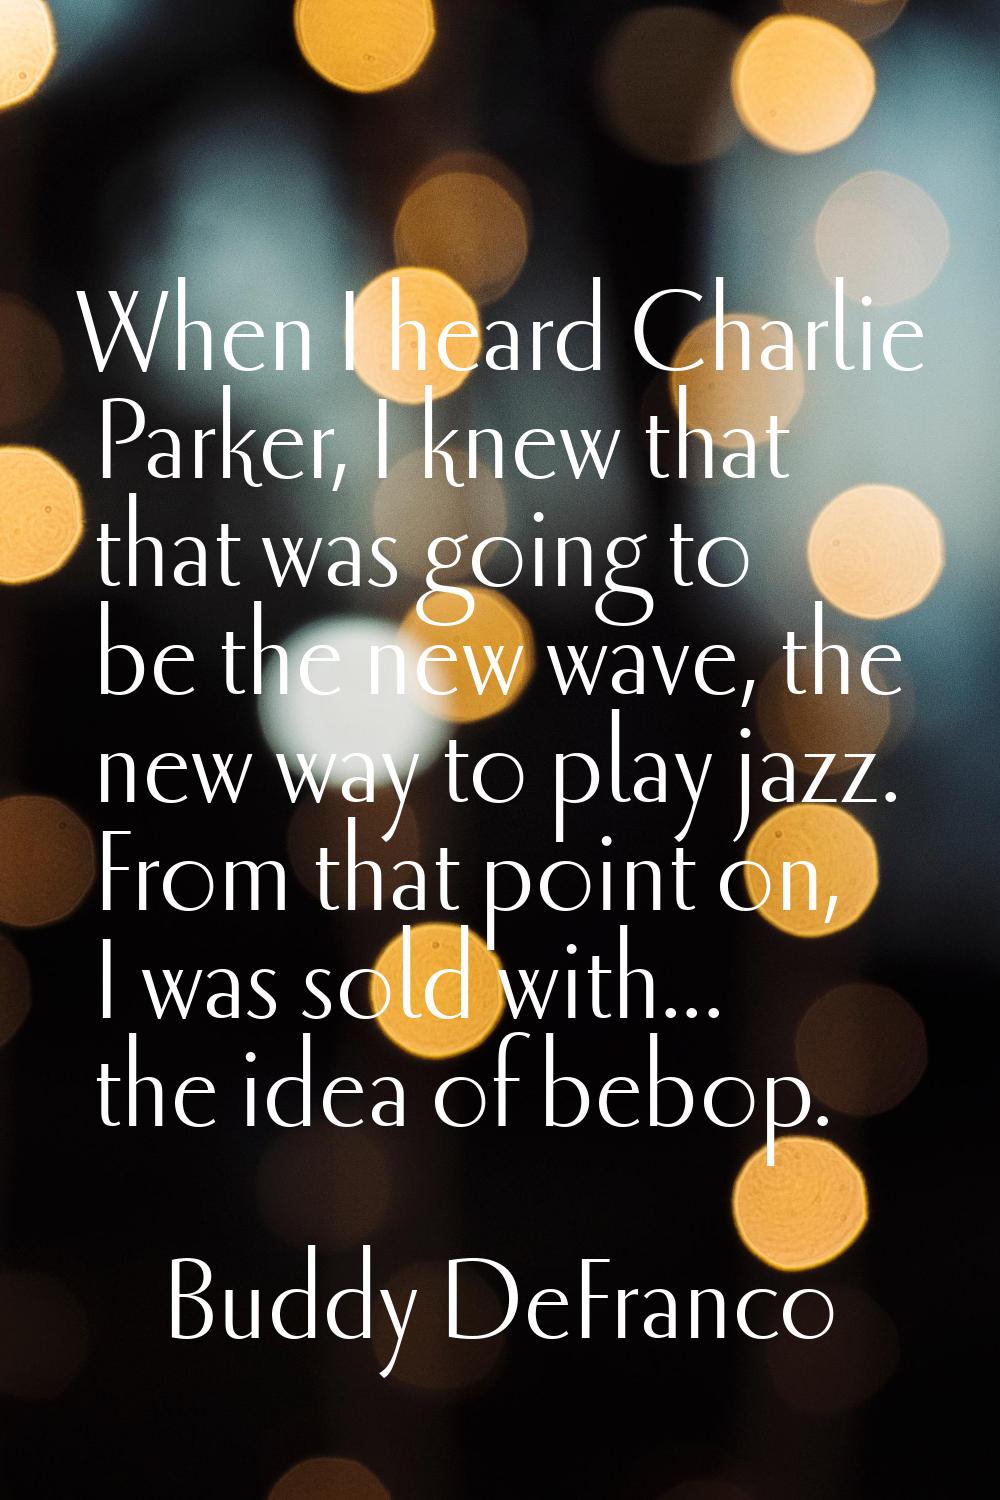 When I heard Charlie Parker, I knew that that was going to be the new wave, the new way to play jaz